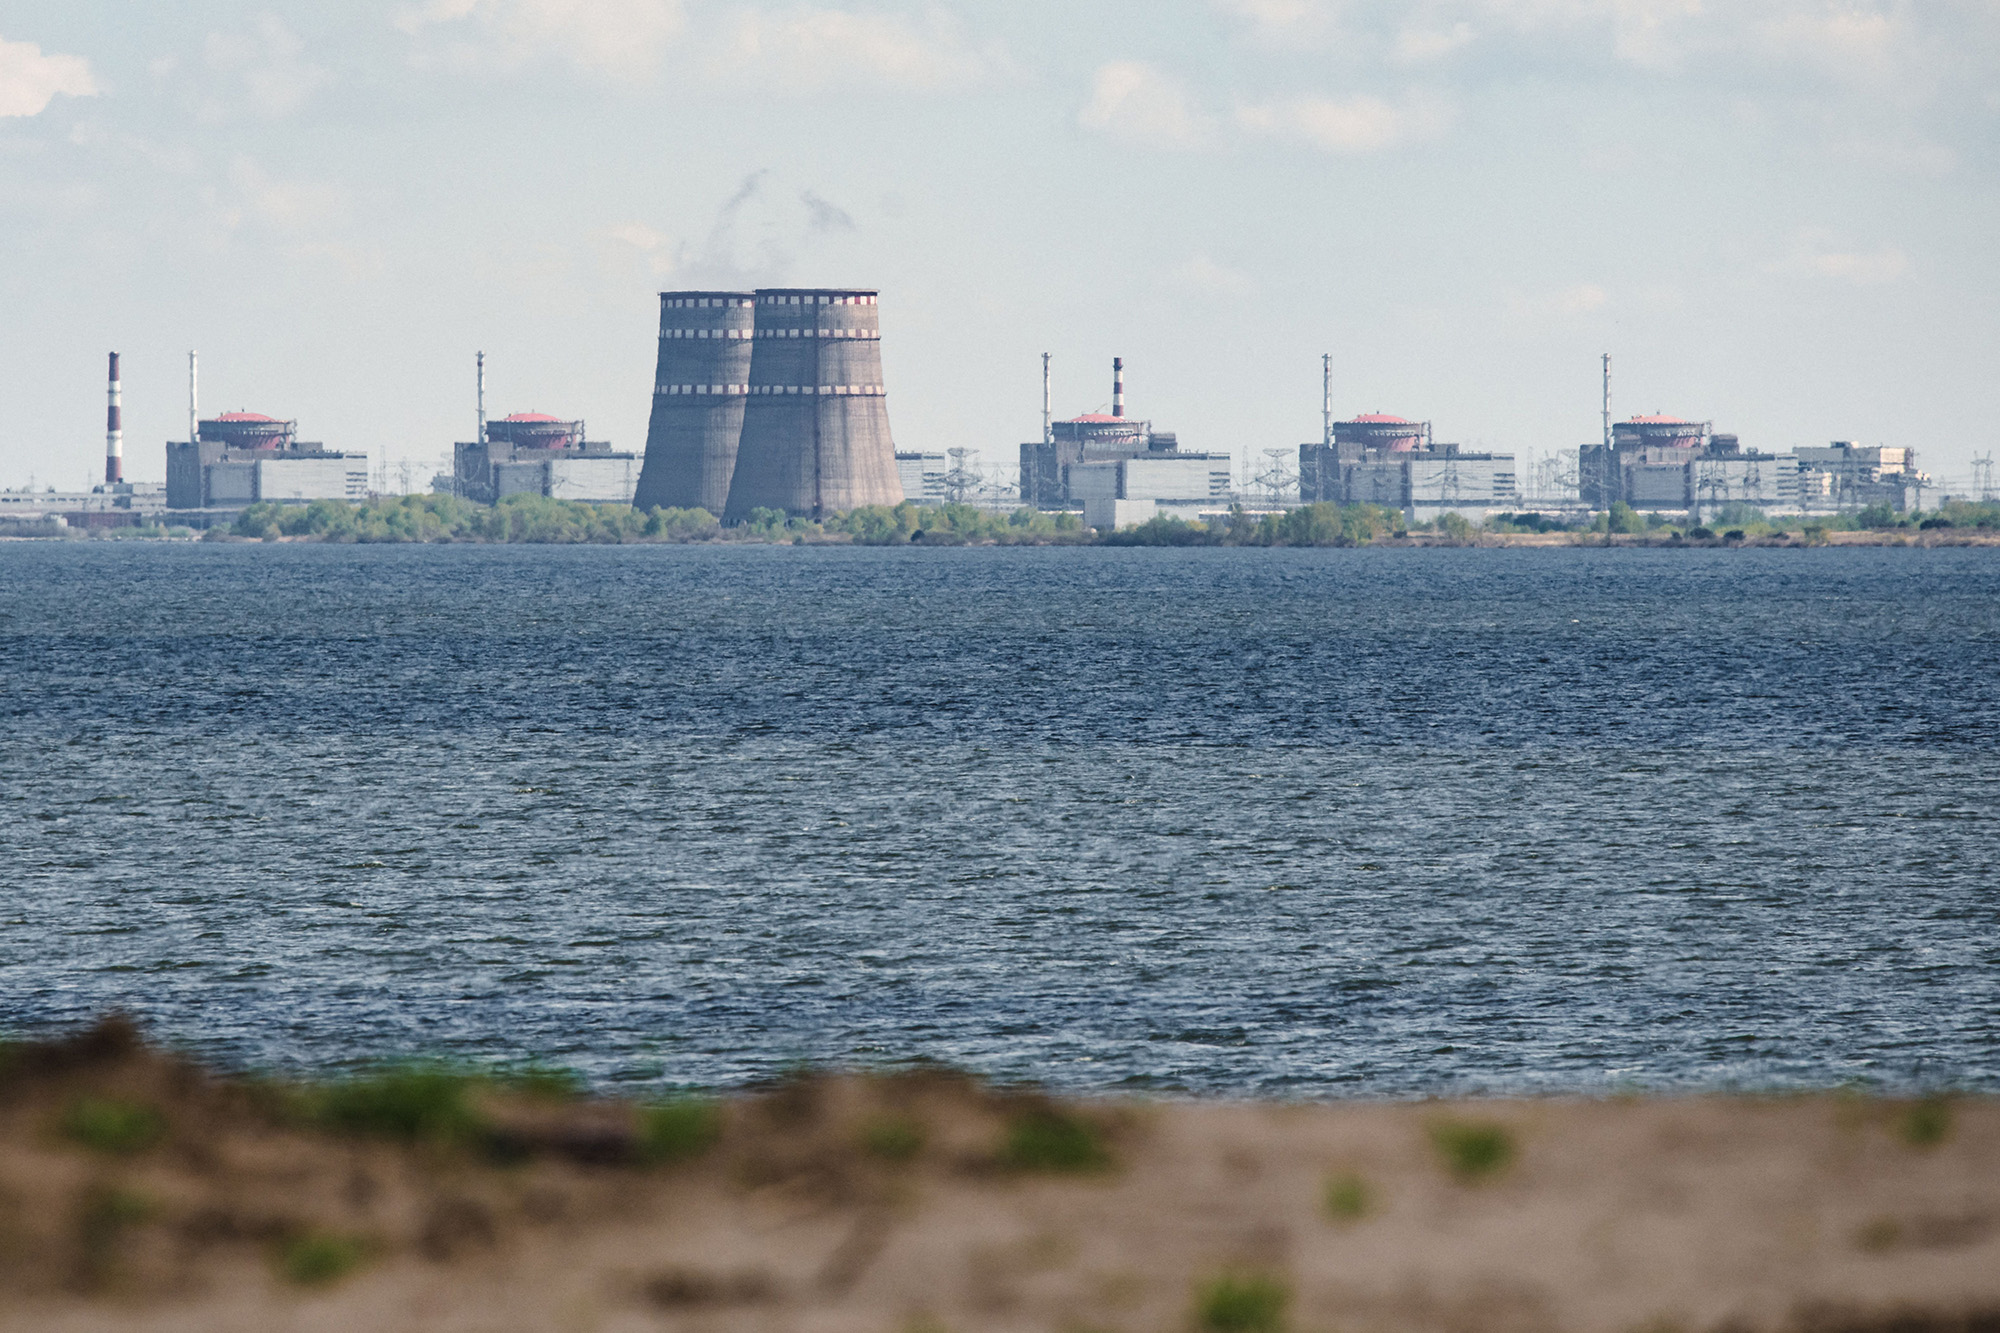 The Zaporizhzhia nuclear power plant situated in the Russian-controlled area of Enerhodar is seen on April 27.